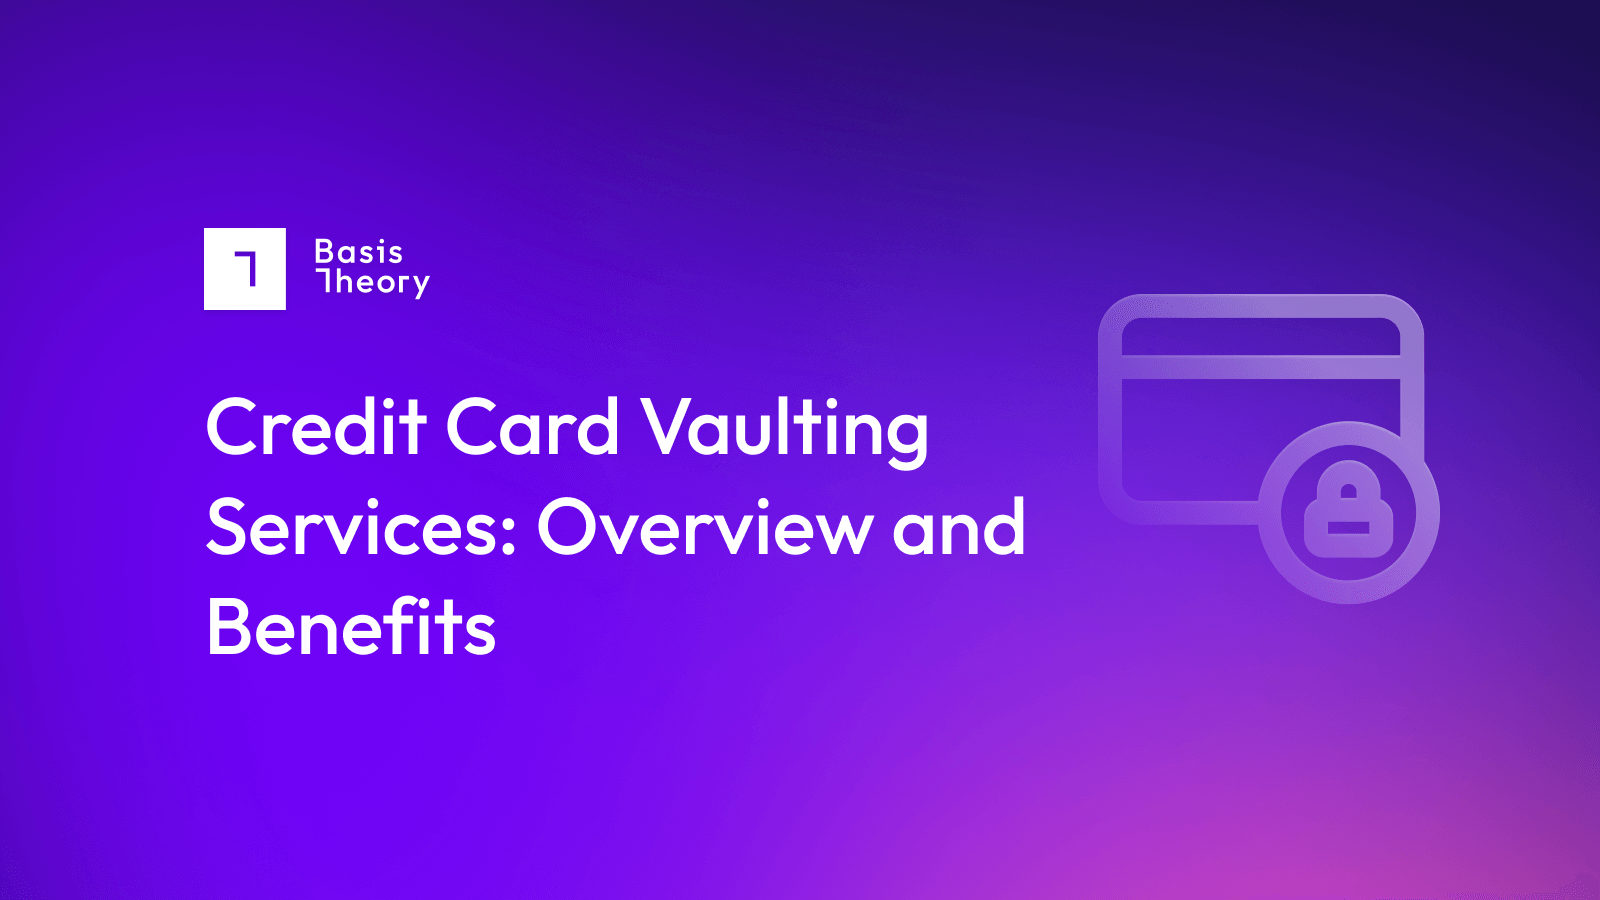 Credit Card Vaulting Services